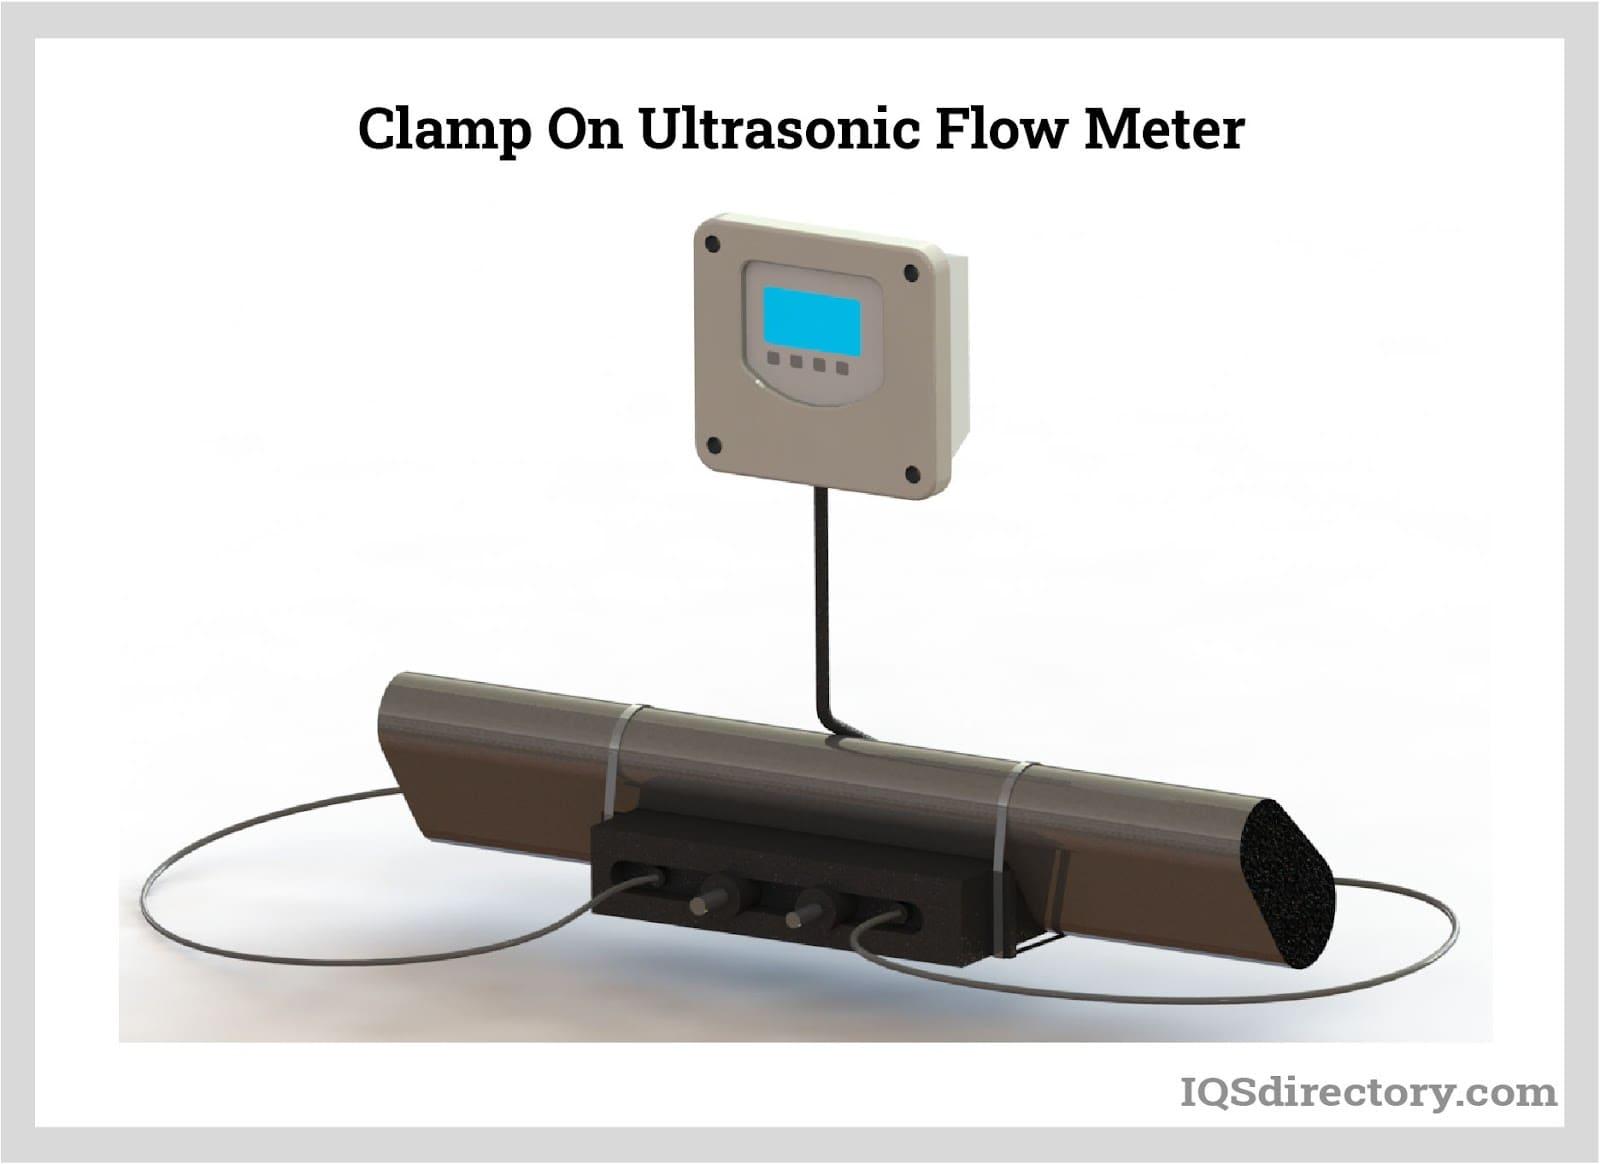 The Clamp-On Ultrasonic Flow Meter